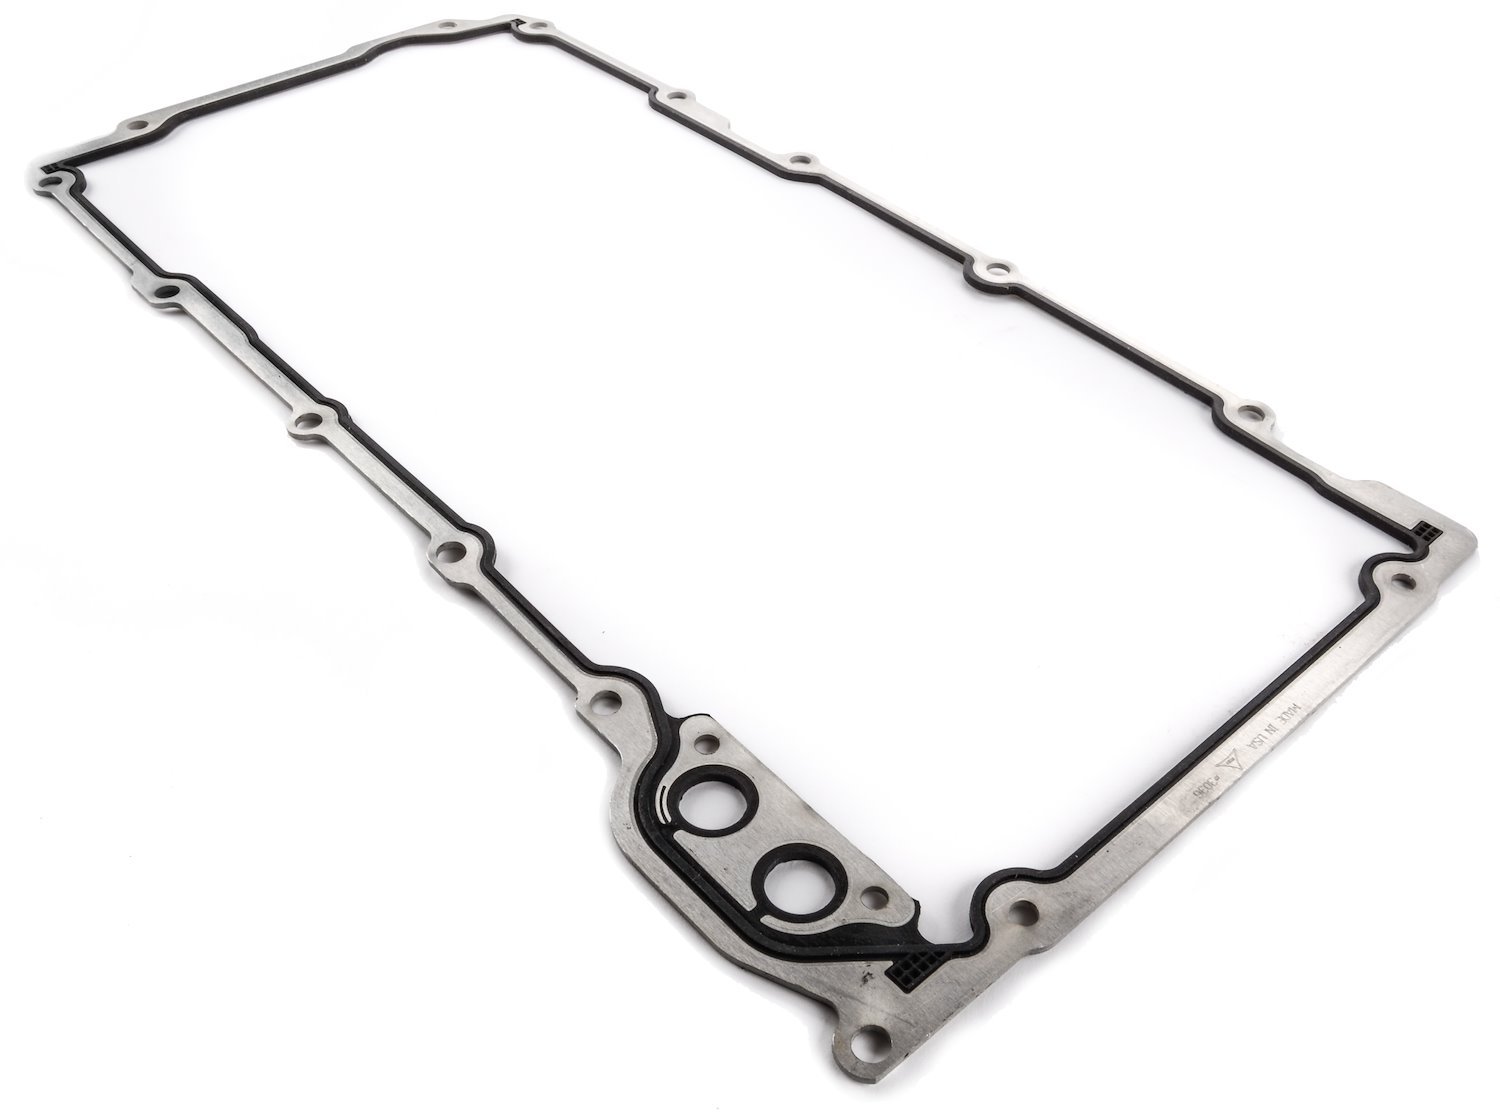 Jegs 2100 One Piece Oil Pan Gasket For Ls Series Engines Jegs High Performance